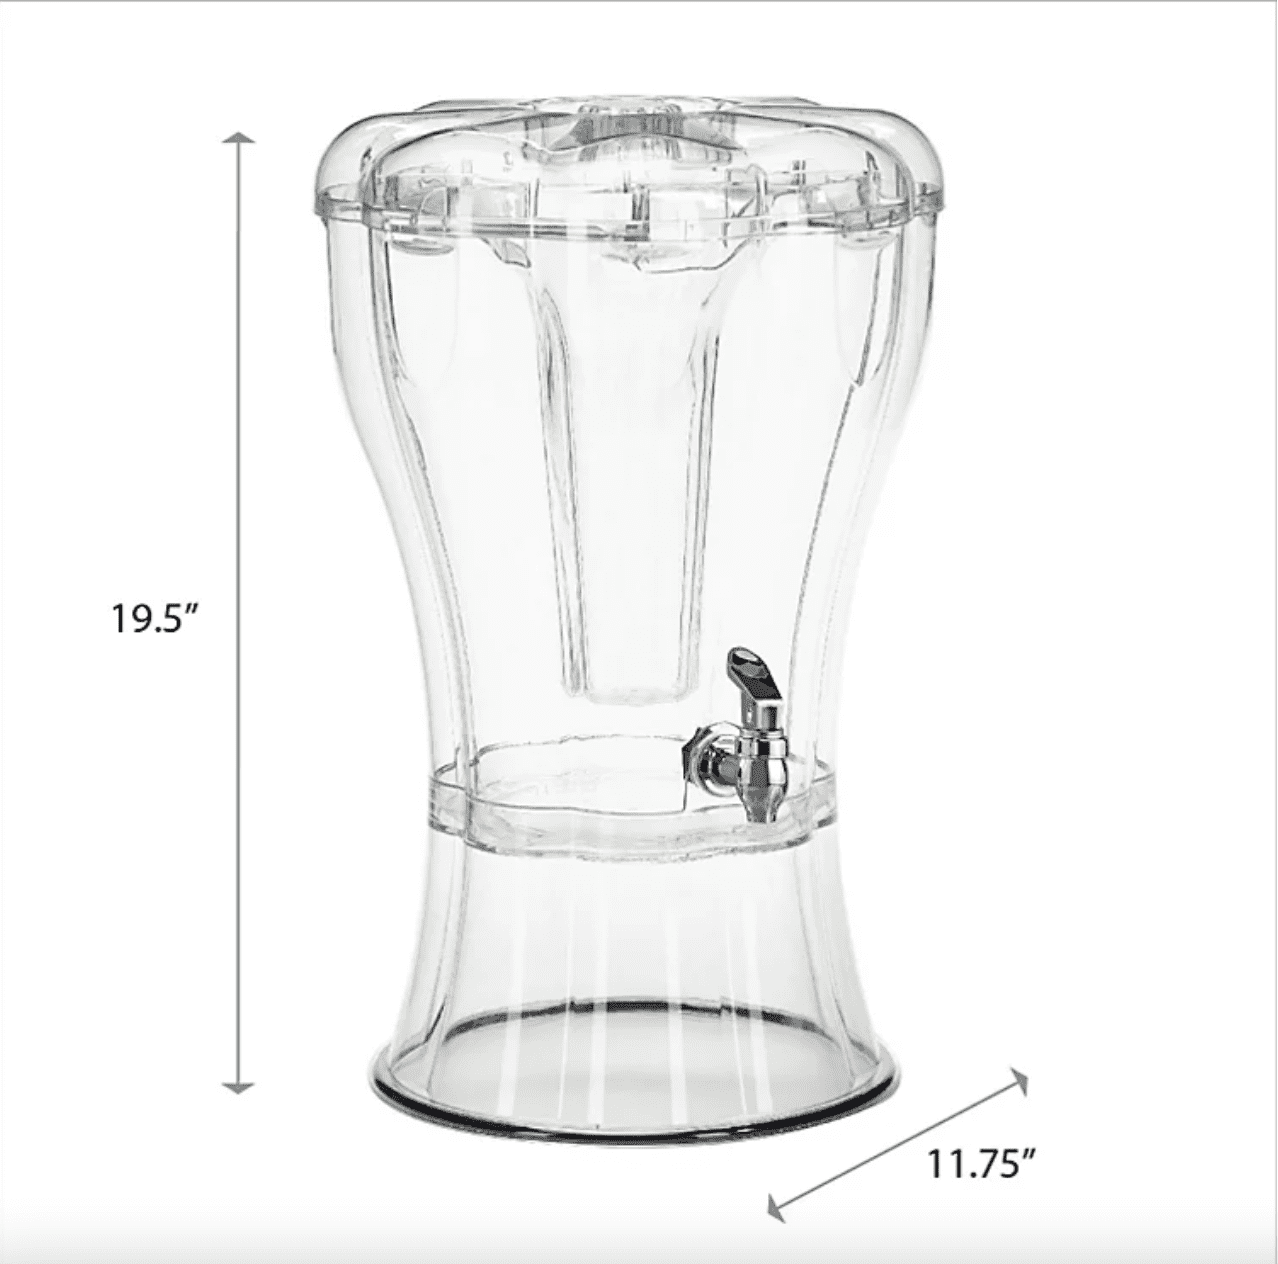 Buddeez 3.5 Gallon Beverage Dispenser - Clear Drink Dispenser, 3.5 Gallon  Plastic Beverage Dispenser comes with Stand, Spigot, Ice Cone, Large Punch